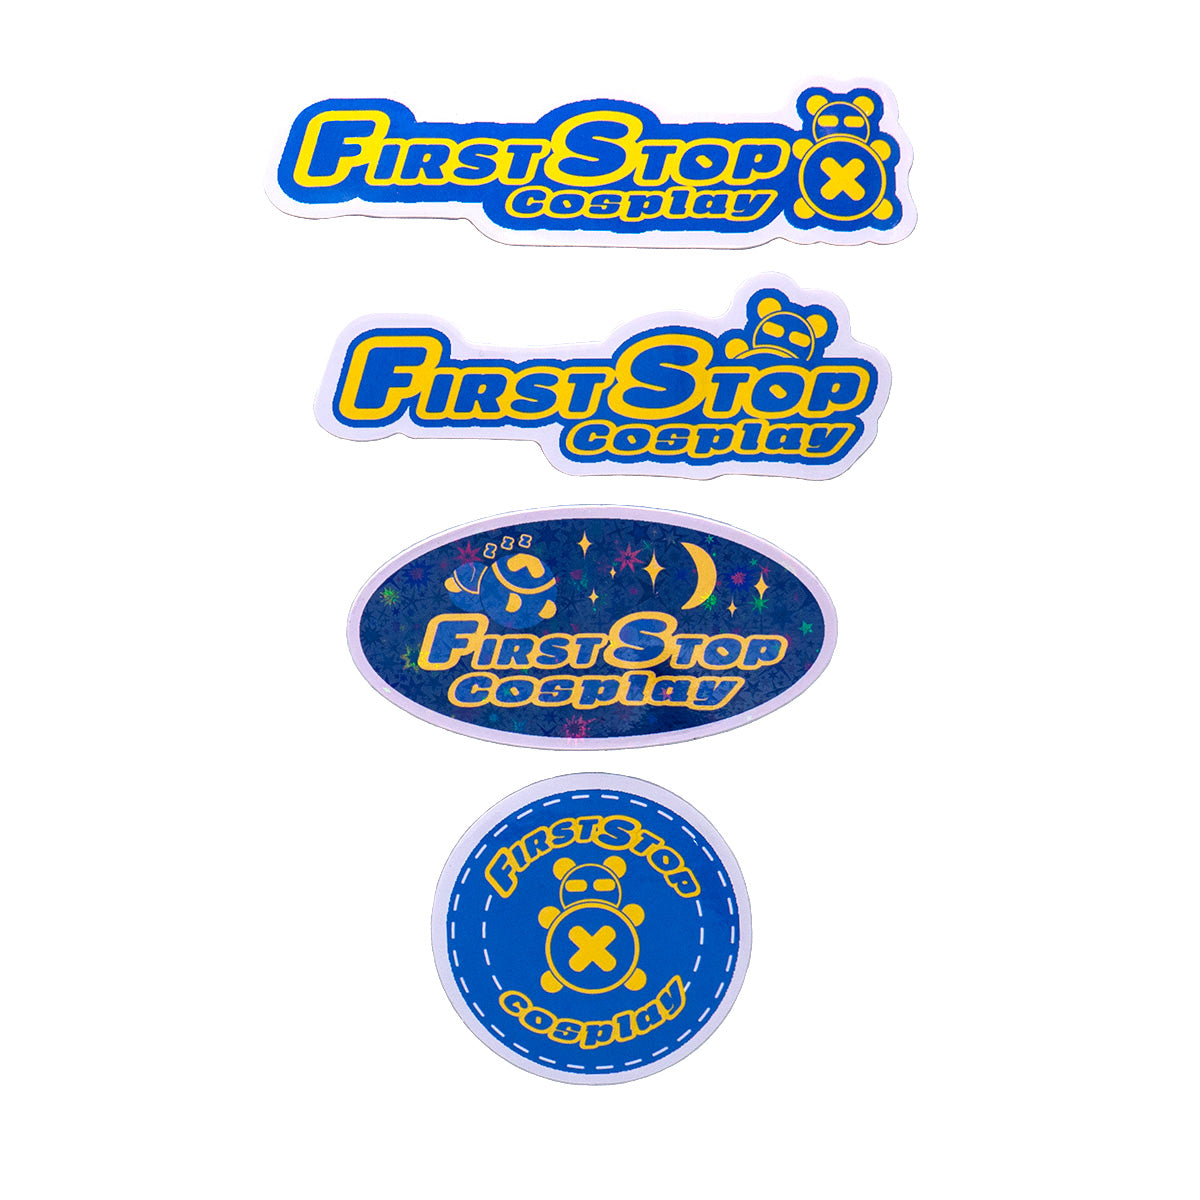 A vertical stack of First Stop Cosplay logo stickers. From Top to Bottom: First Stop Cosplay Logo sticker, Peek-A-Boo Timmy sticker, Sleepy Time Timmy sticker, and Circle Stitch Logo Sticker.